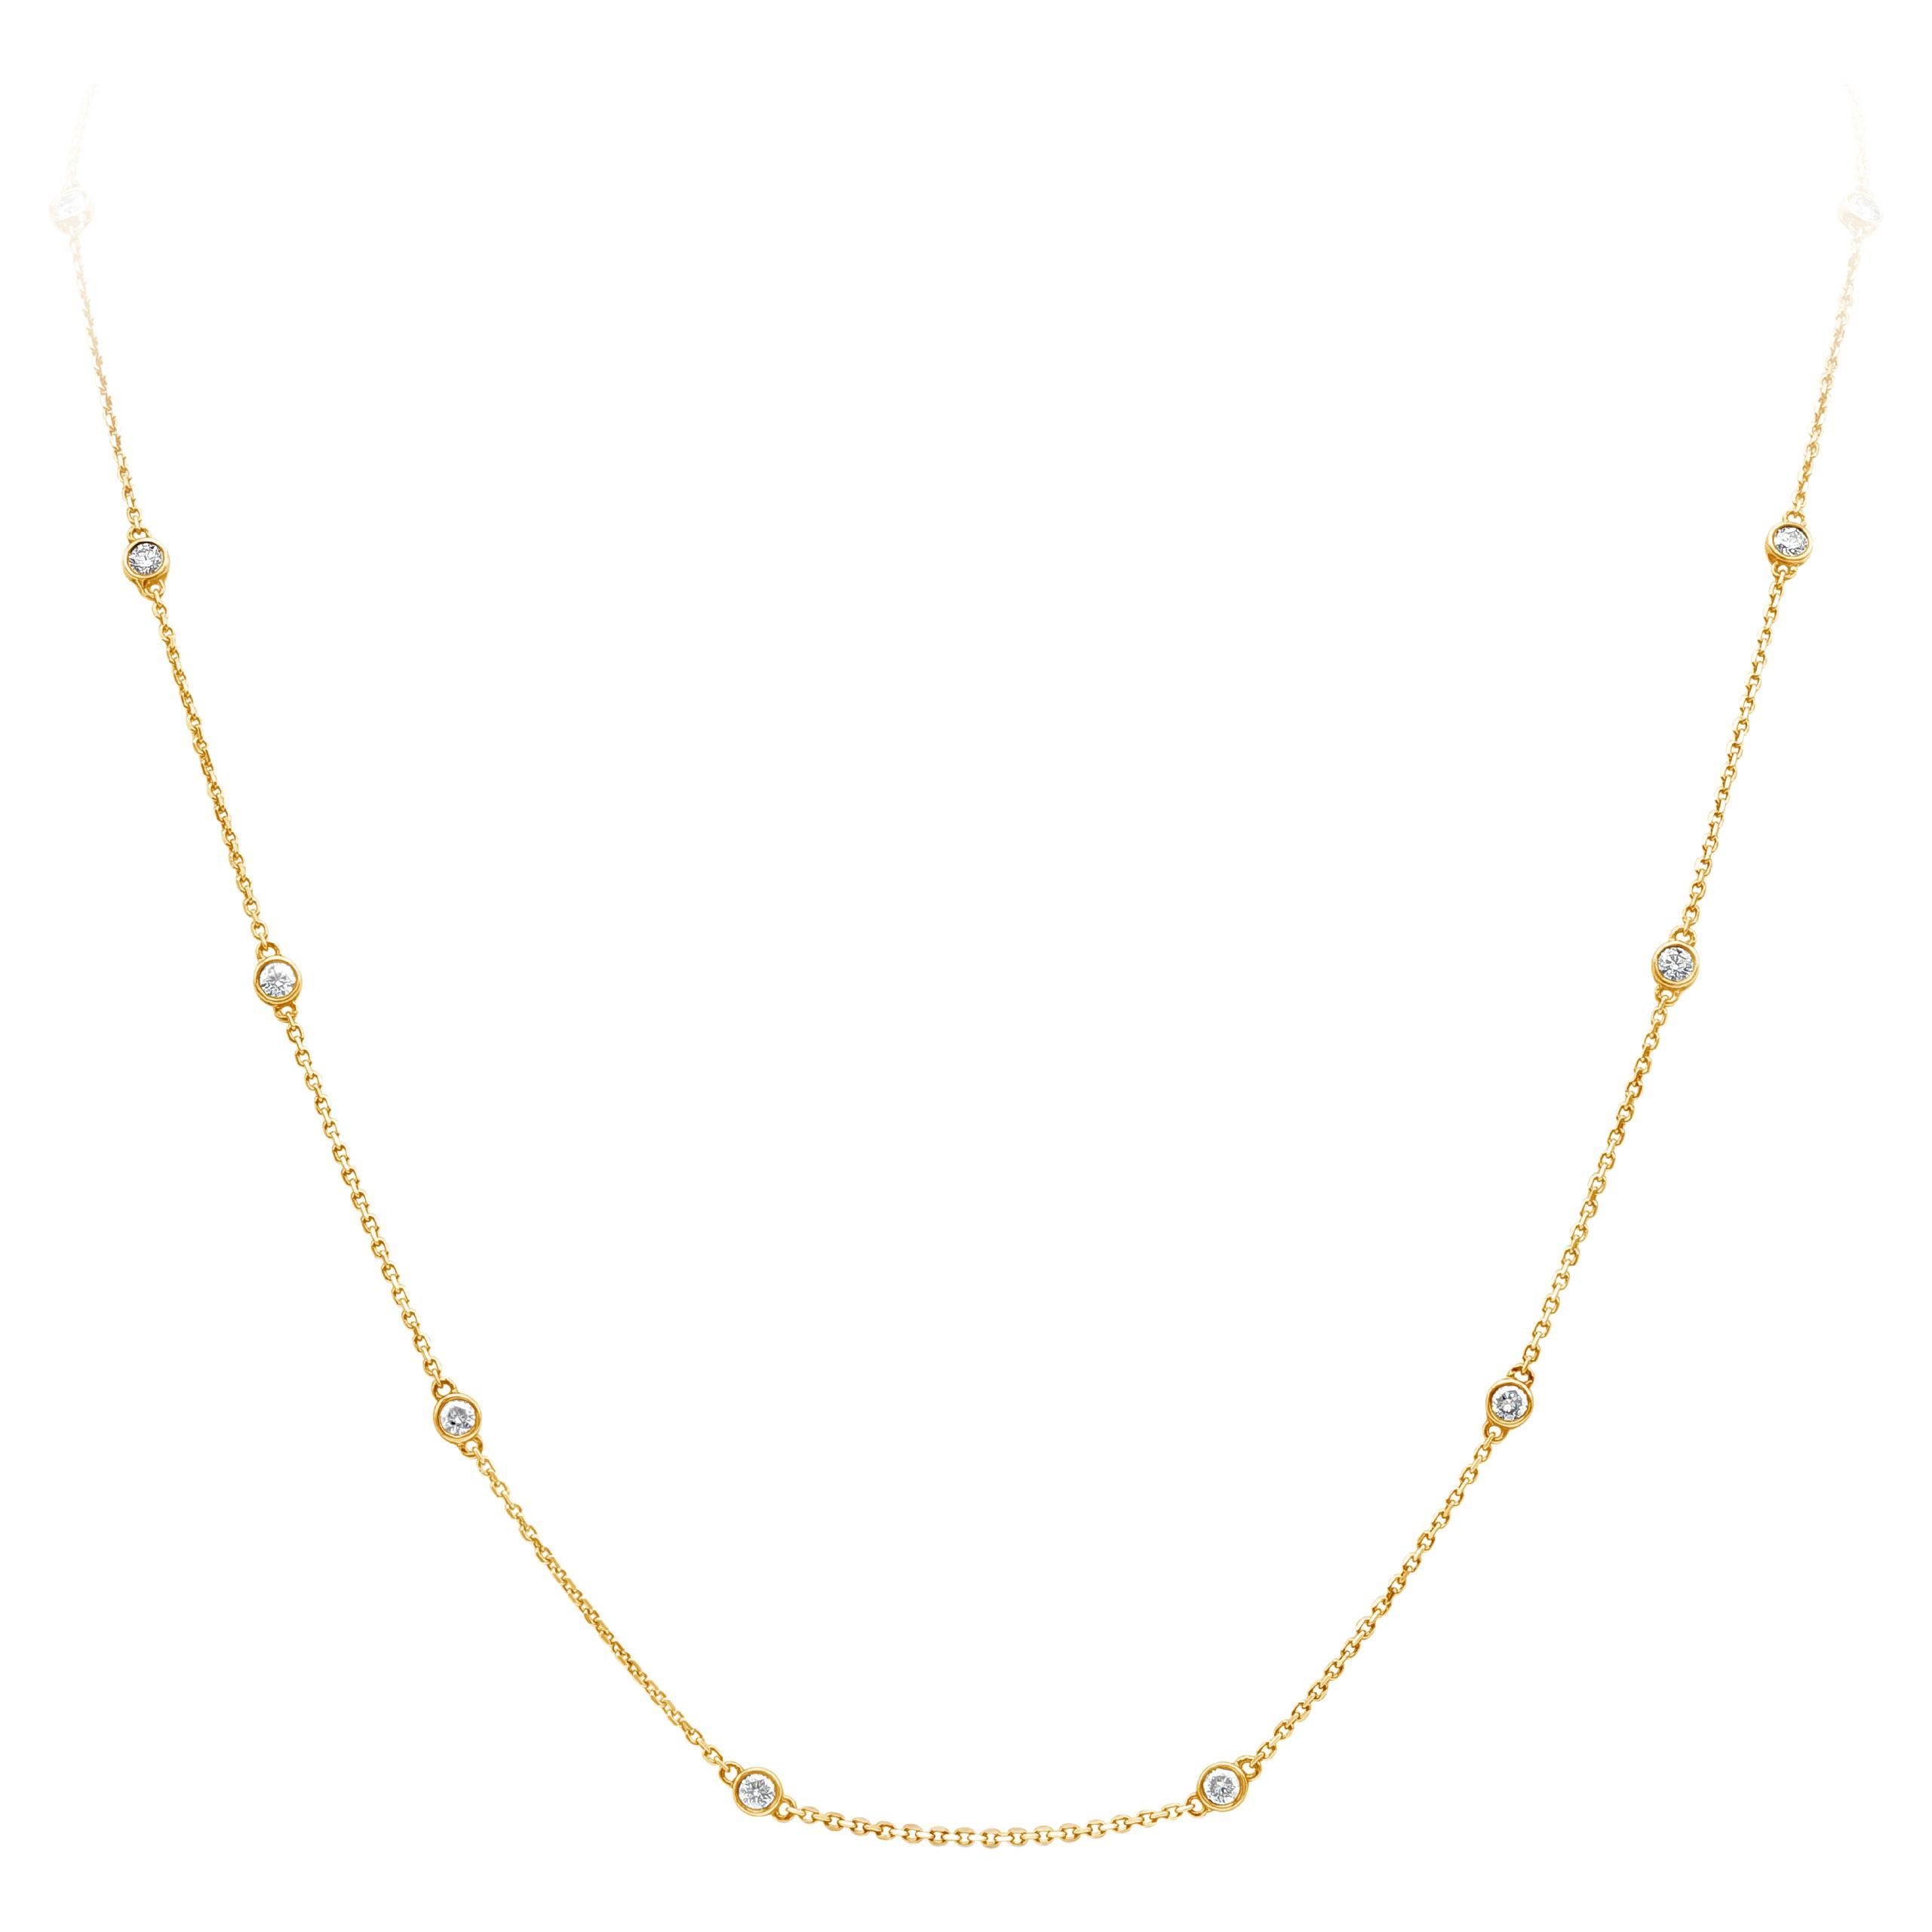 Roman Malakov1.70 Carat Total Round Diamond By The Yard Necklace in Yellow Gold